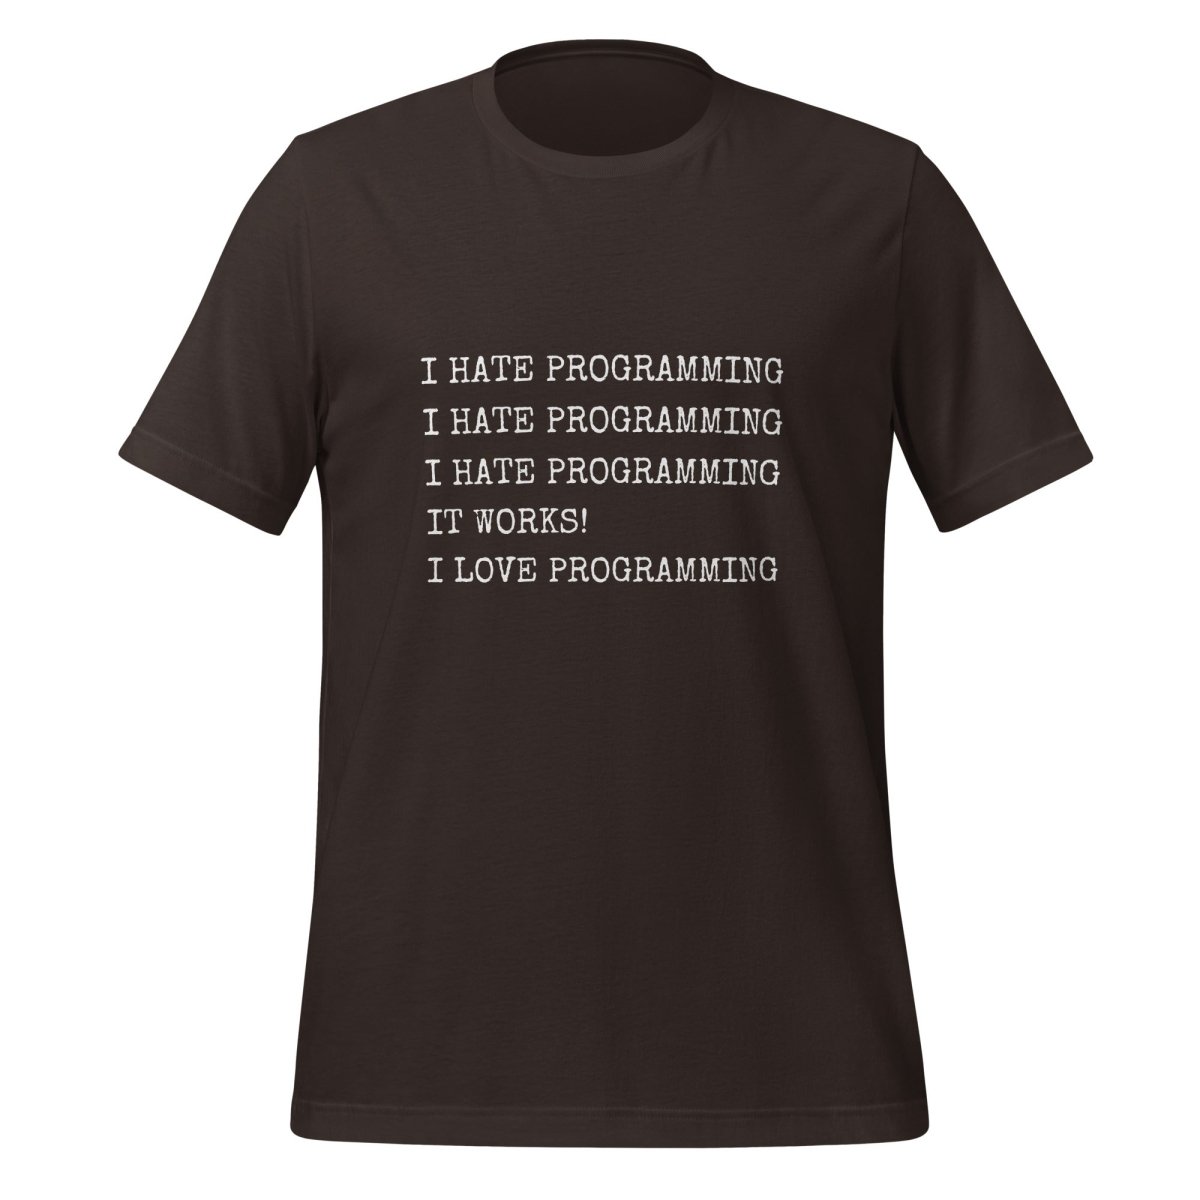 I Hate Programming T - Shirt (unisex) - Brown - AI Store